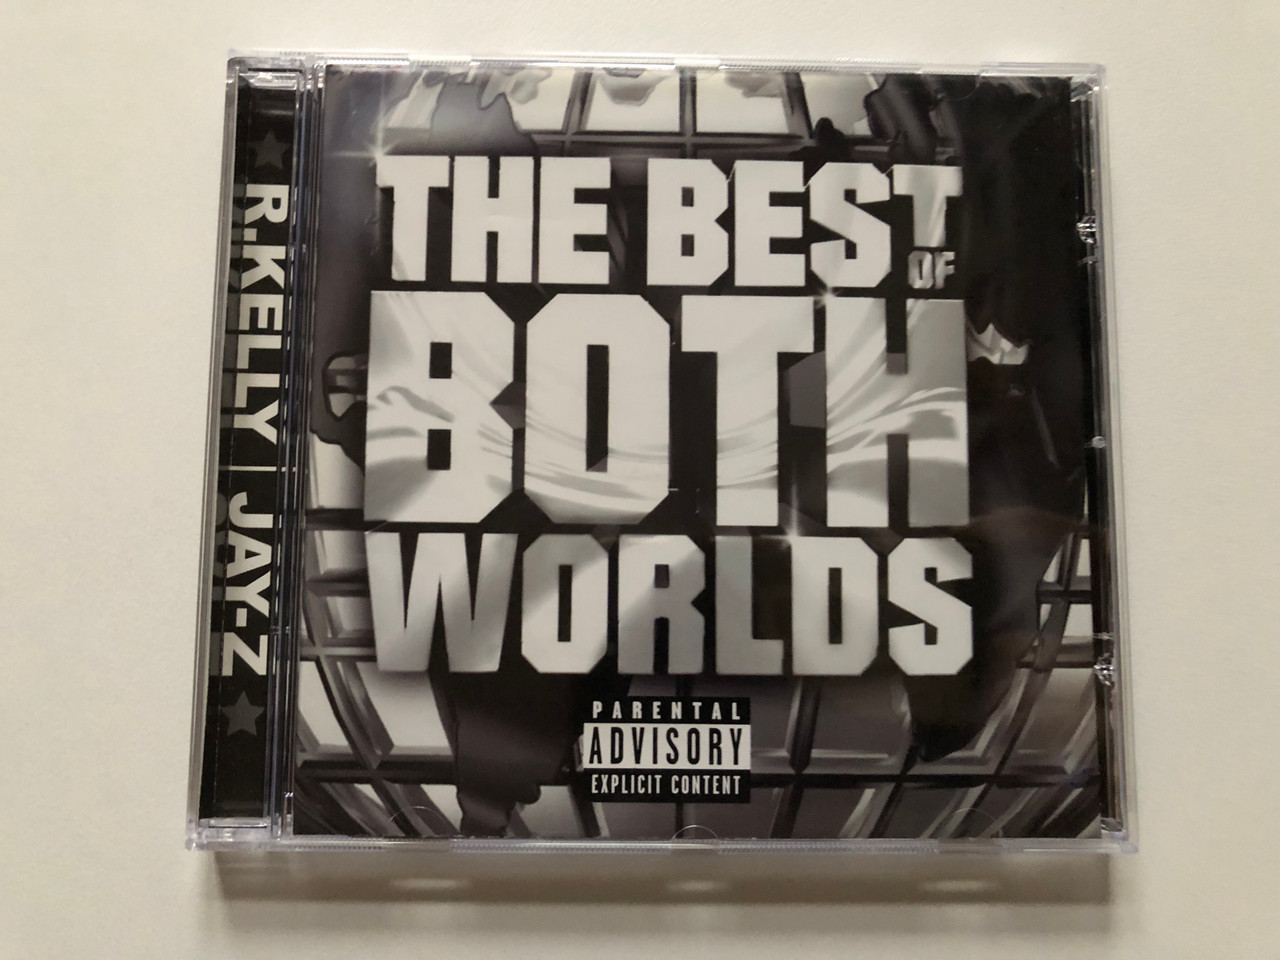 https://cdn10.bigcommerce.com/s-62bdpkt7pb/products/0/images/312898/R._Kelly_Jay-Z_The_Best_Of_Both_Worlds_Roc-A-Fella_Records_Audio_CD_2002_724381243824_1__89361.1700212568.1280.1280.JPG?c=2